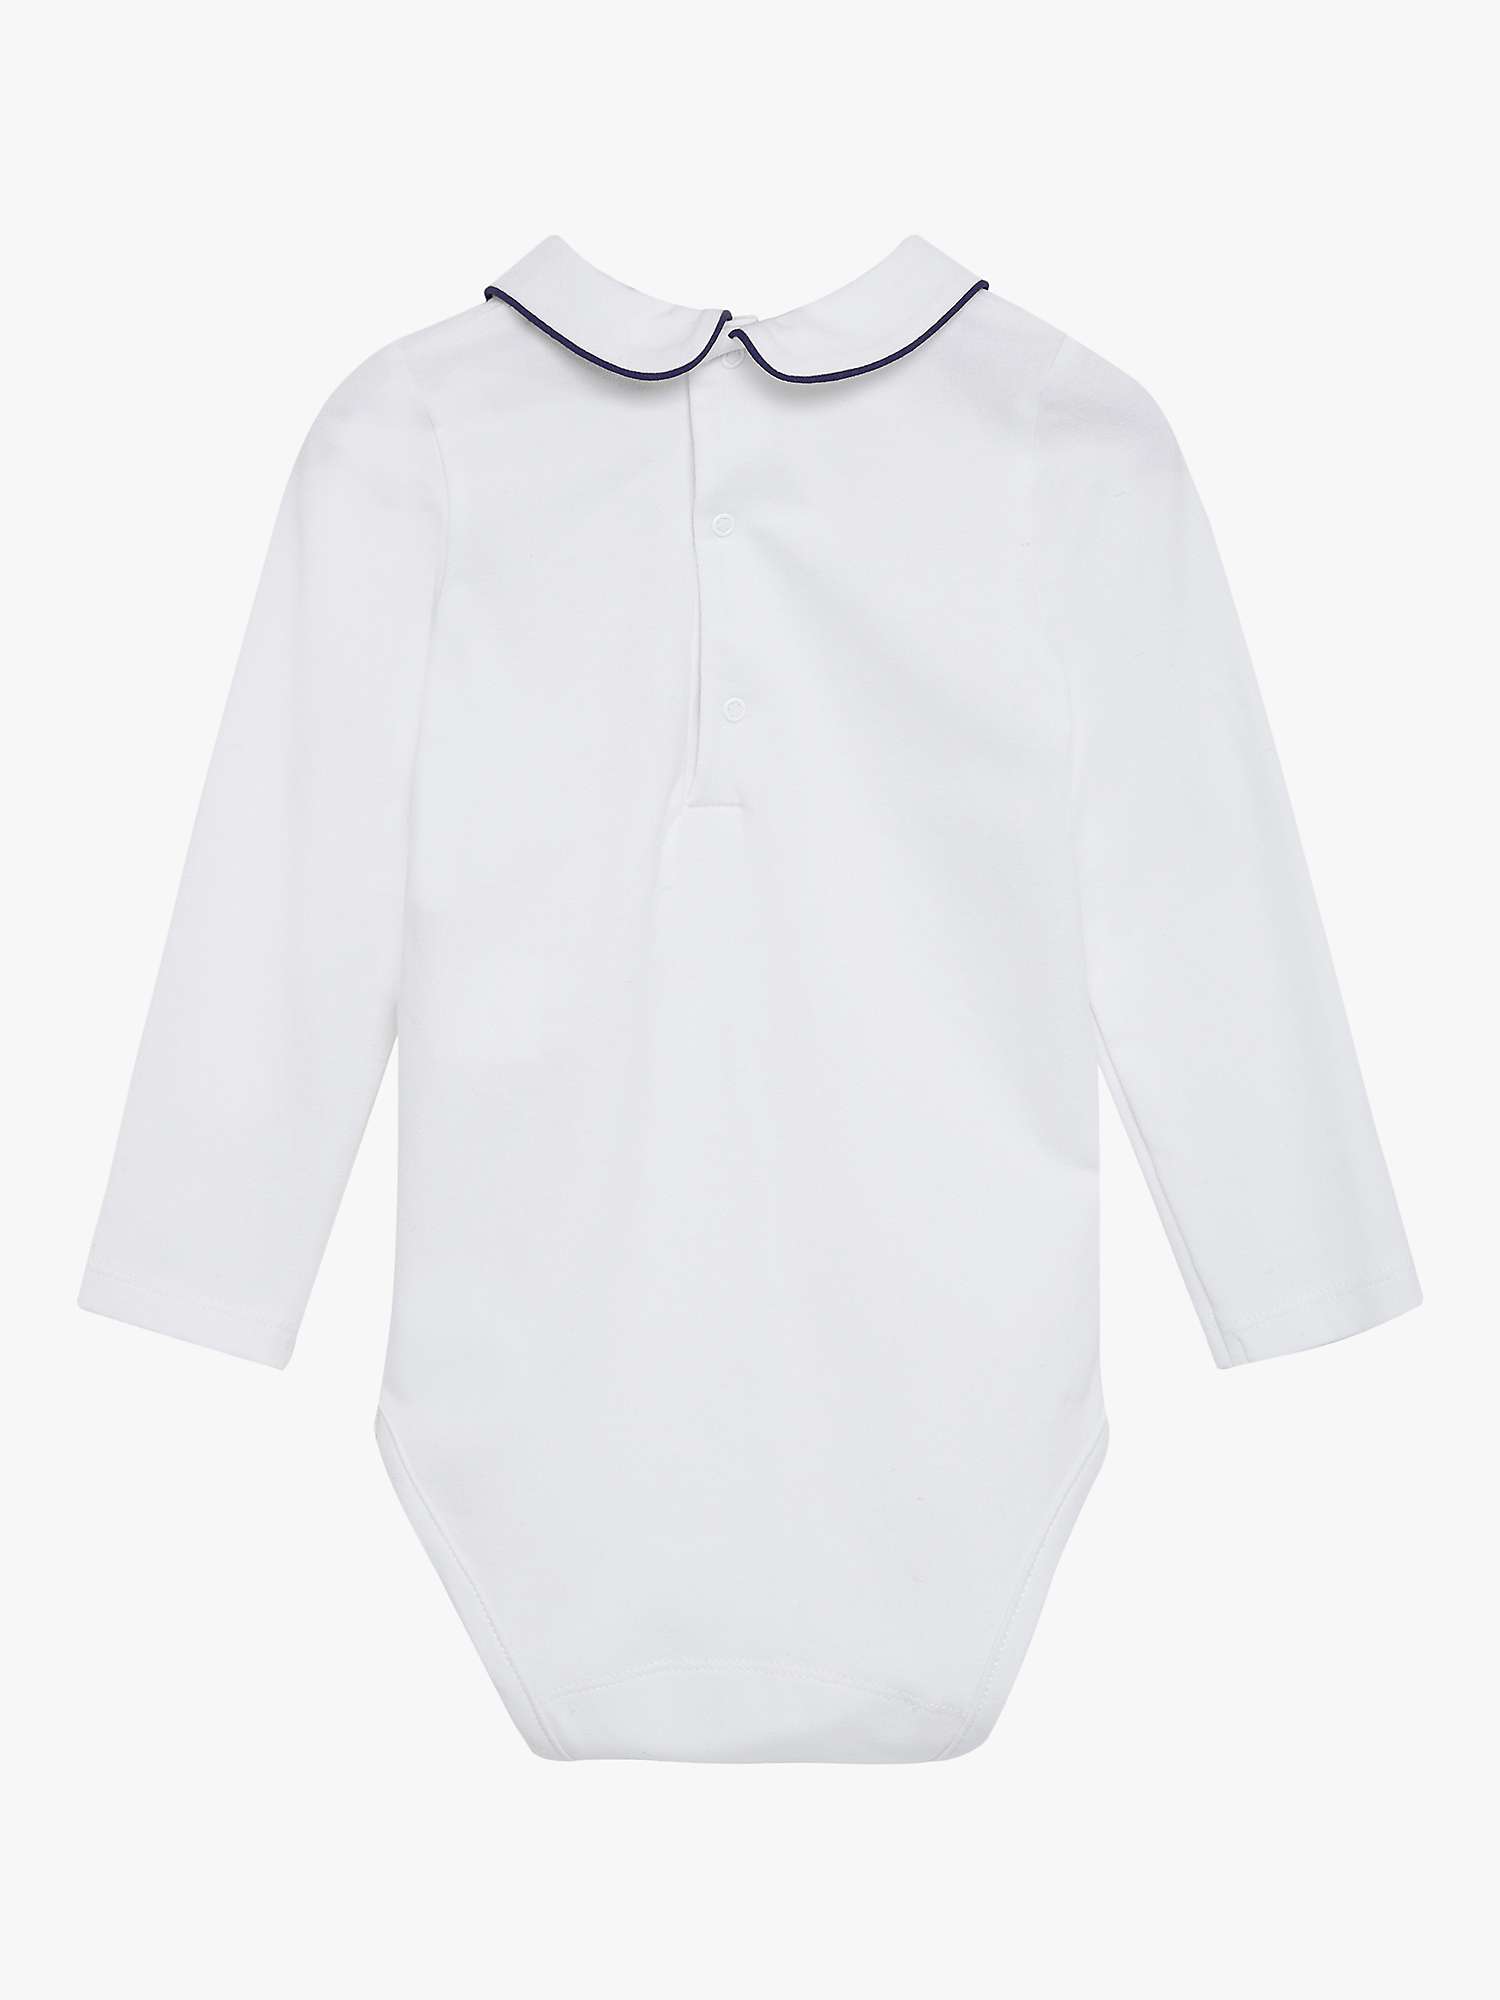 Buy Trotters Thomas Brown Baby Milo Jersey Bodysuit, White/Navy Online at johnlewis.com